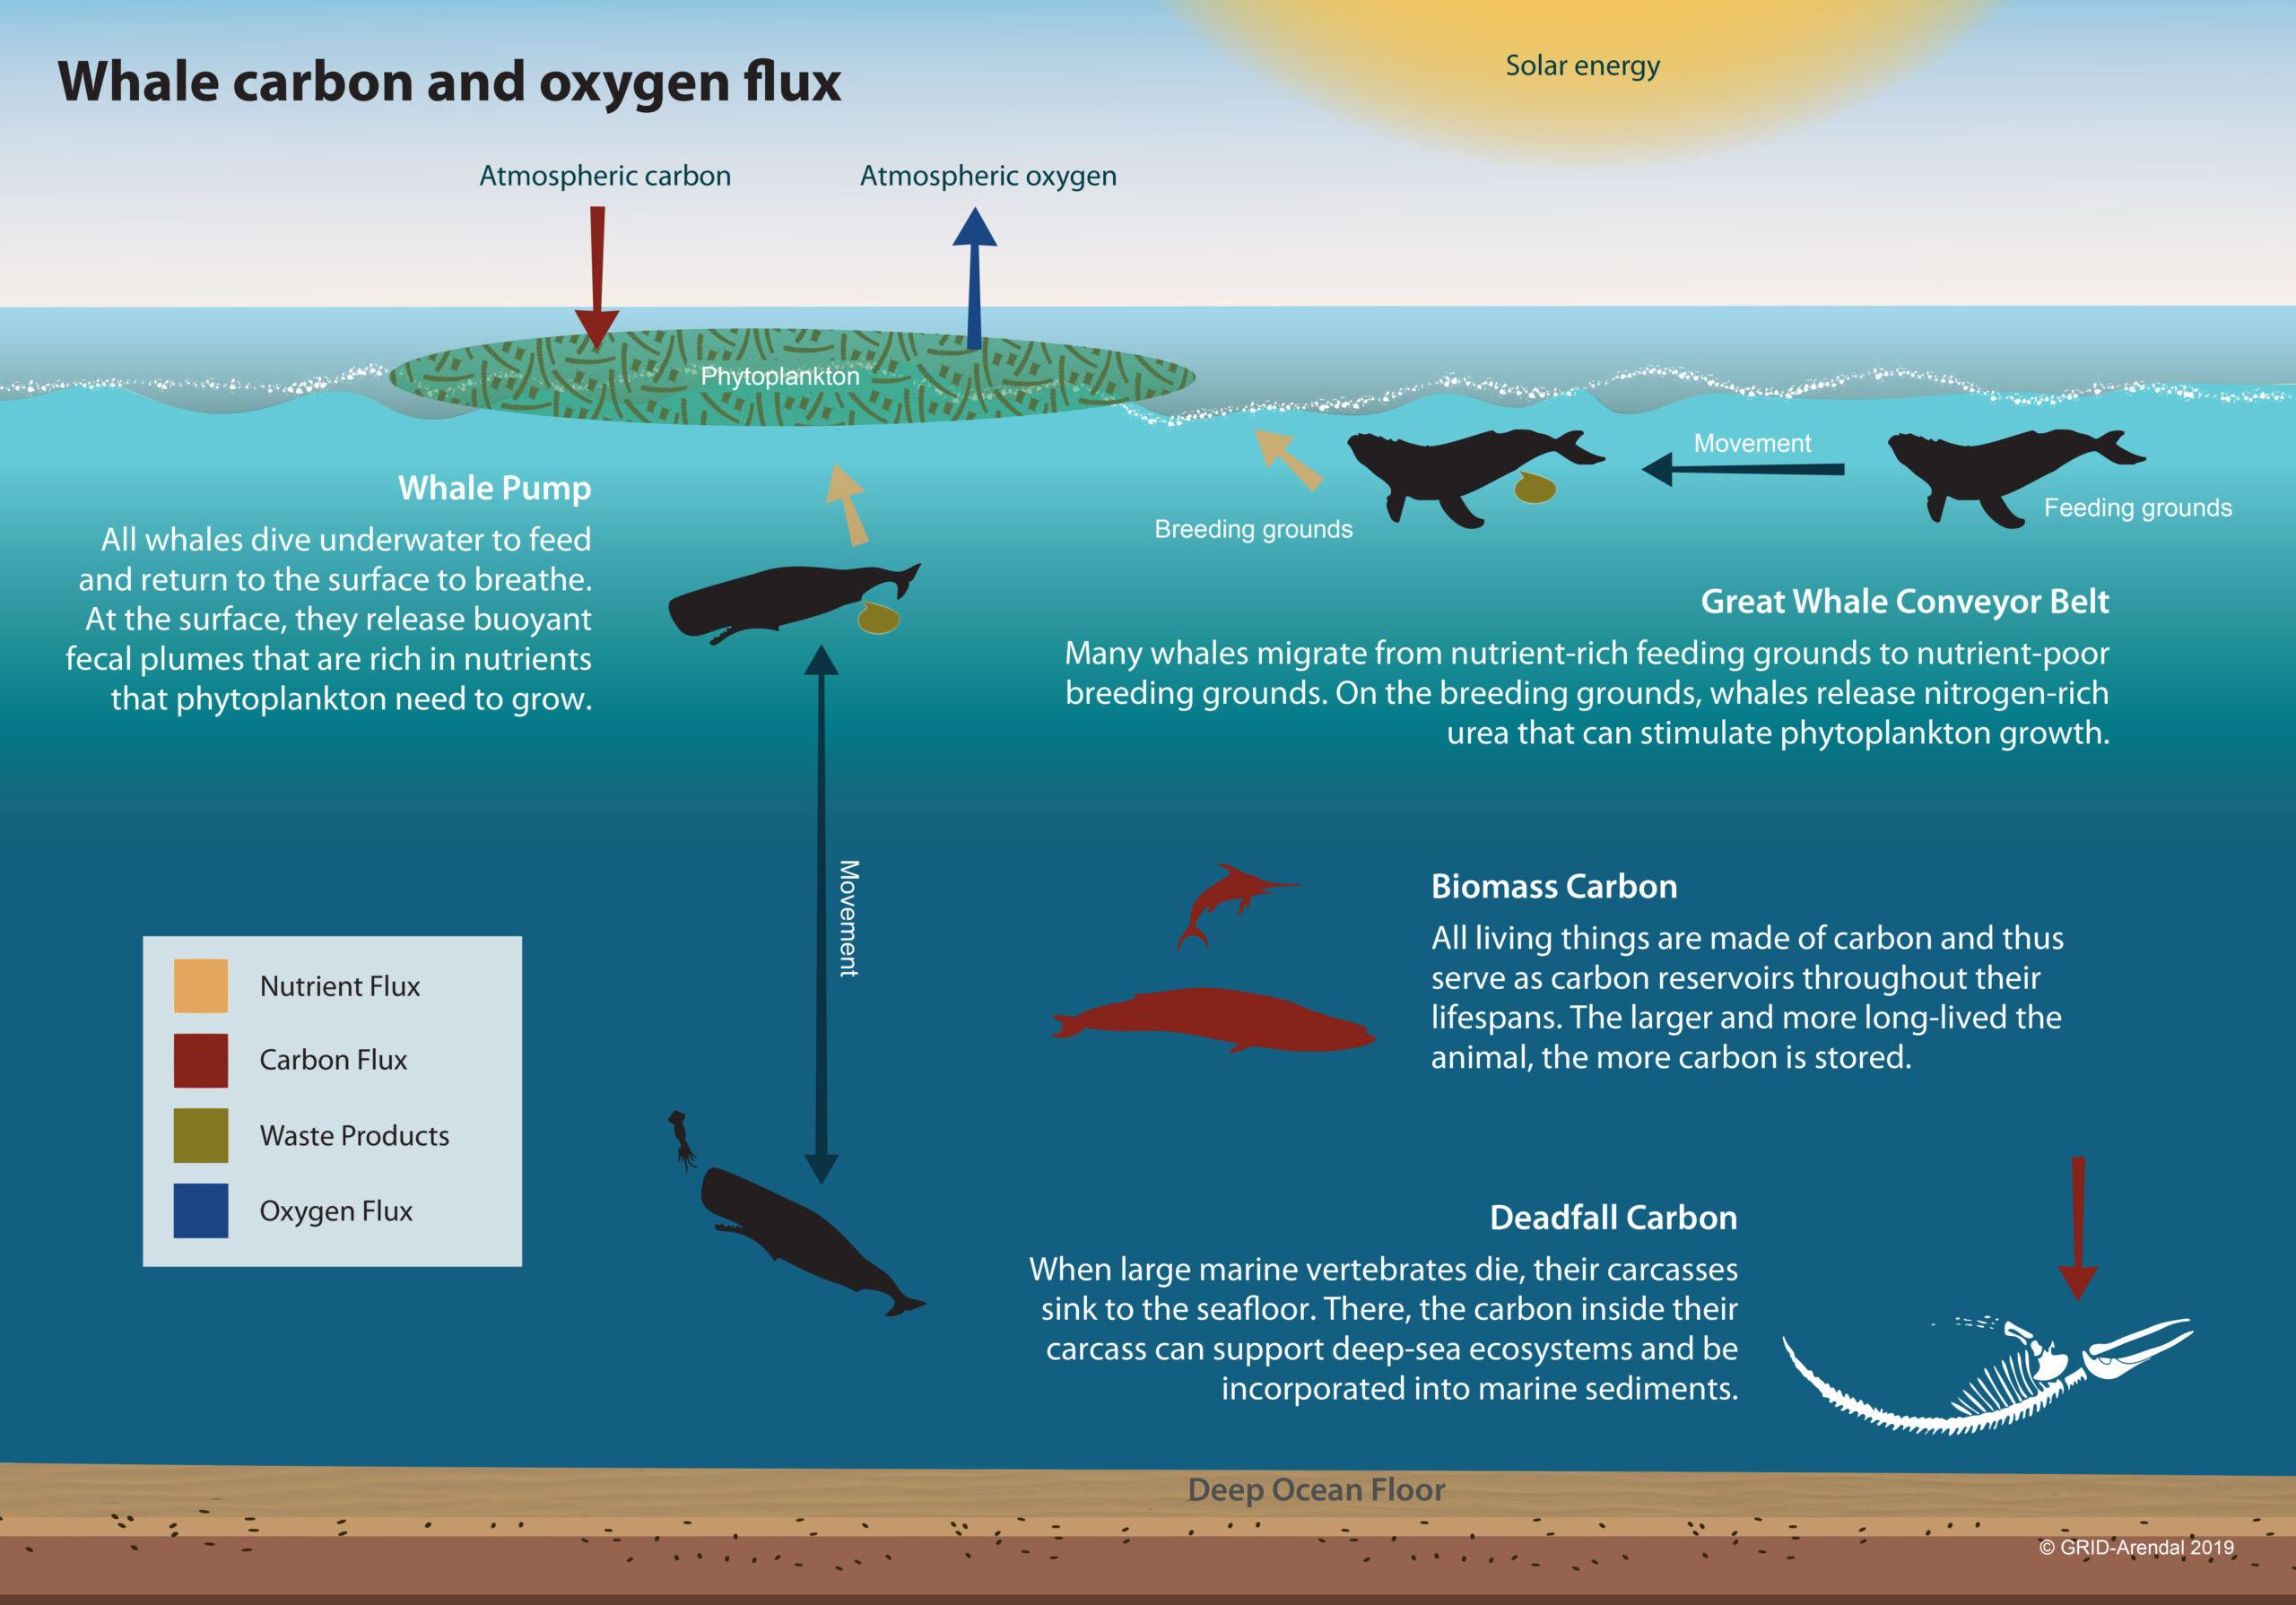 Fig. 2: The Whale pump. Without it, we would lose much of the oxygen we need to breathe, we would have very little if any seafood, and there would be far more CO2 in the atmosphere, meaning a far hotter and more dangerous climate. Whales are a keystone species. Without them, we may not survive the existential climate threat. (Image: GRID Arendal)